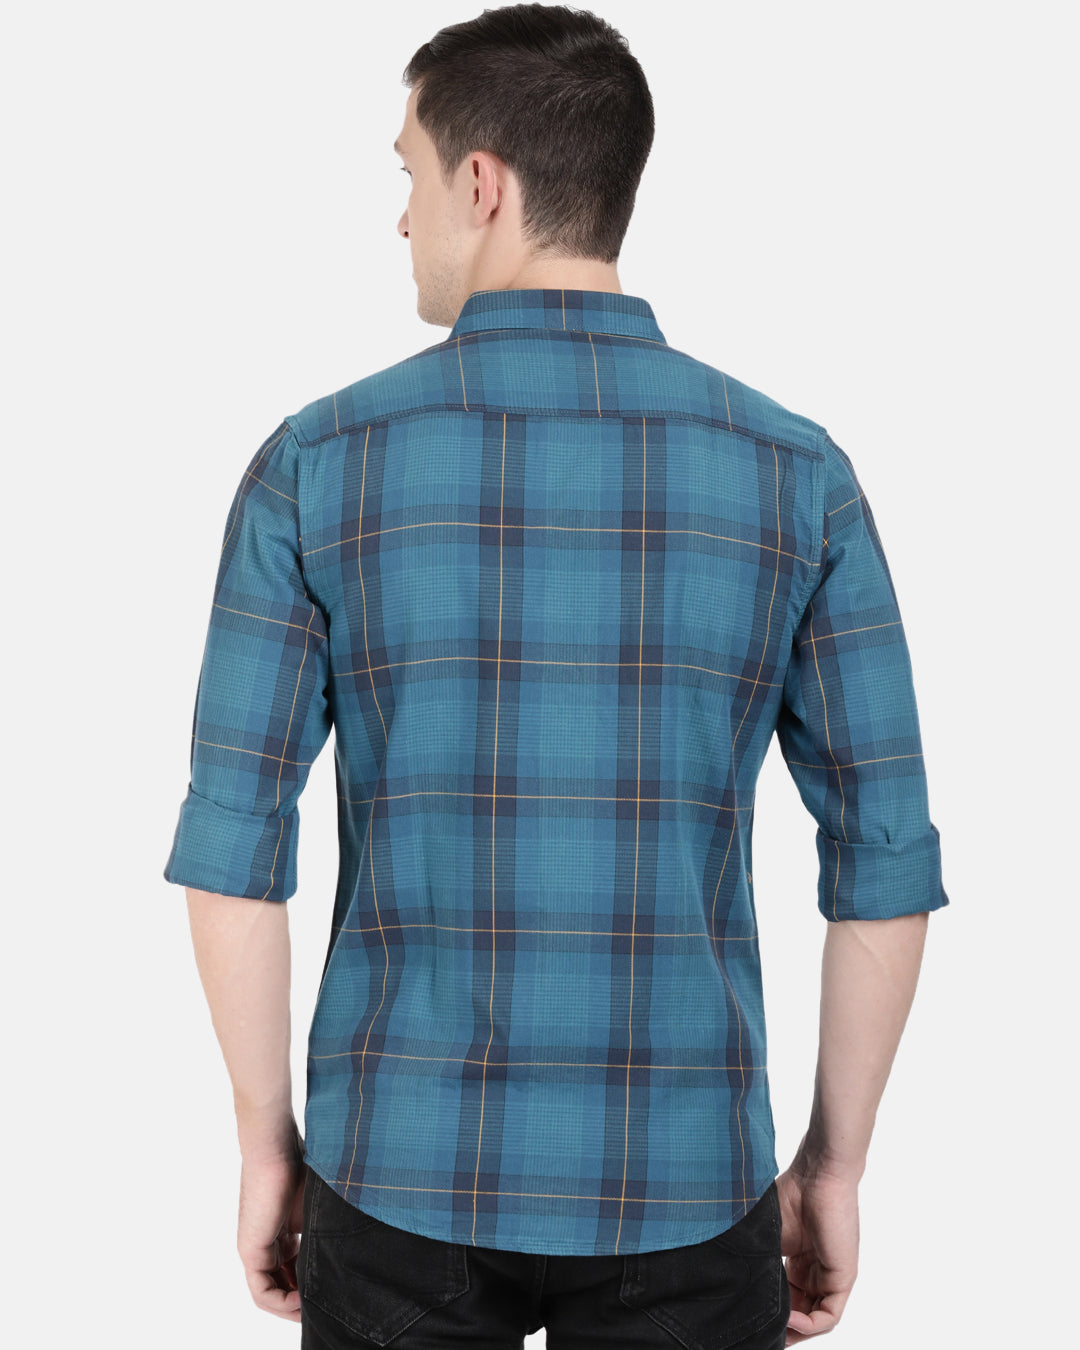 Crocodile Casual Full Sleeve Slim Fit Checks Teal with Collar Shirt for Men